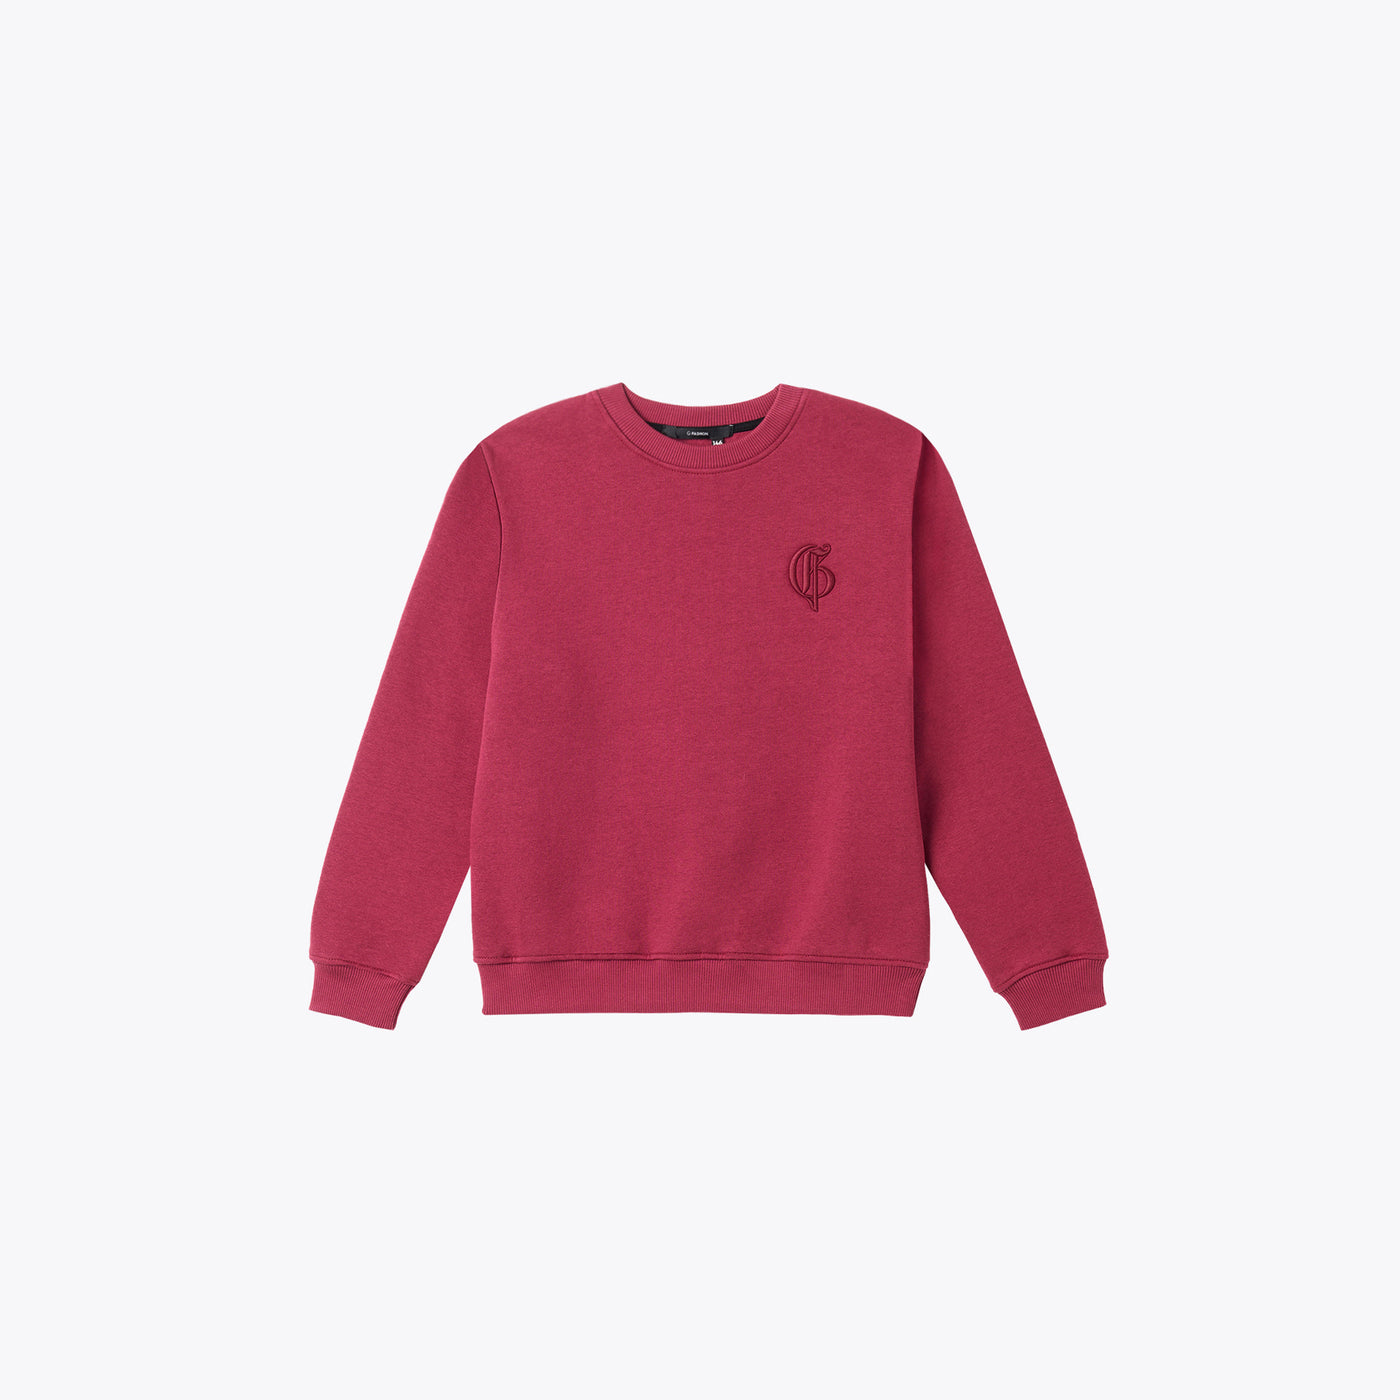 PINK SWEATER WITH ROUND NECK